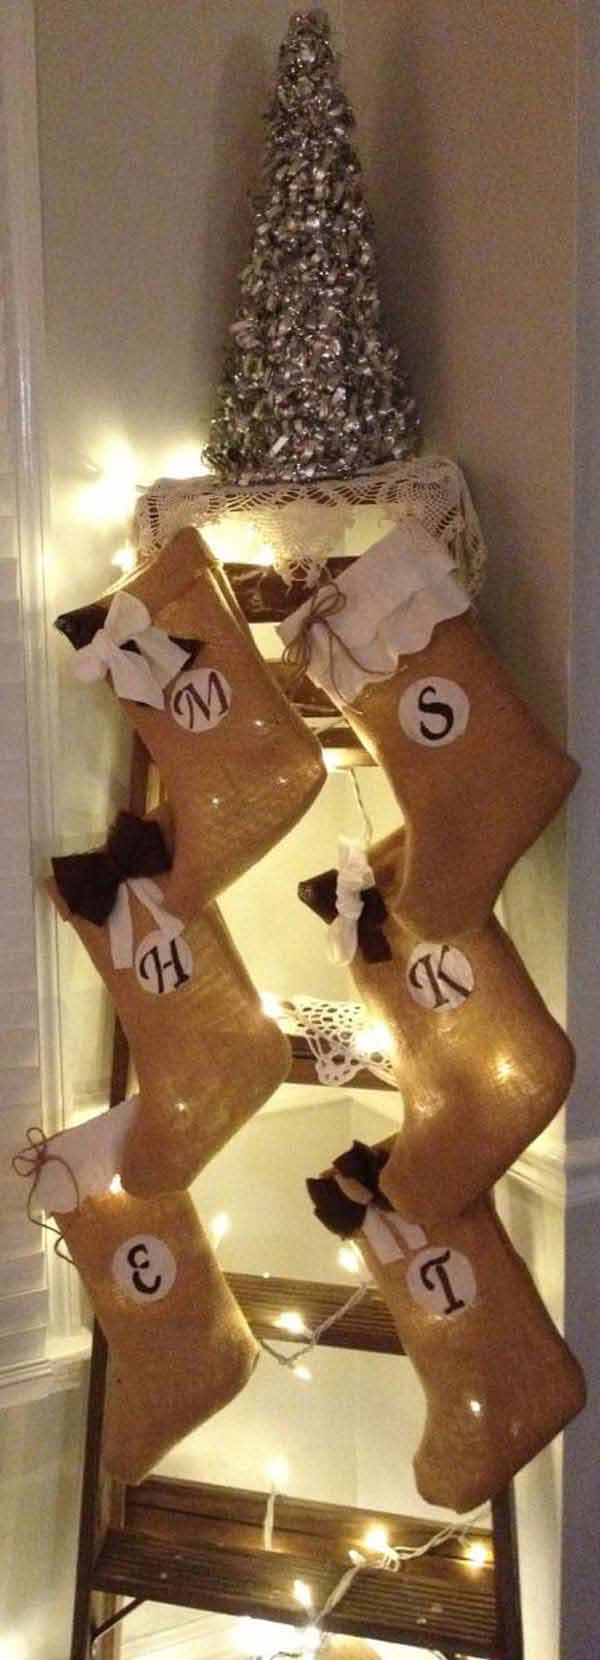 #21 BURLAP STOCKINGS INTEGRATE PERFECTLY INTO THE CHRISTMAS SPIRIT